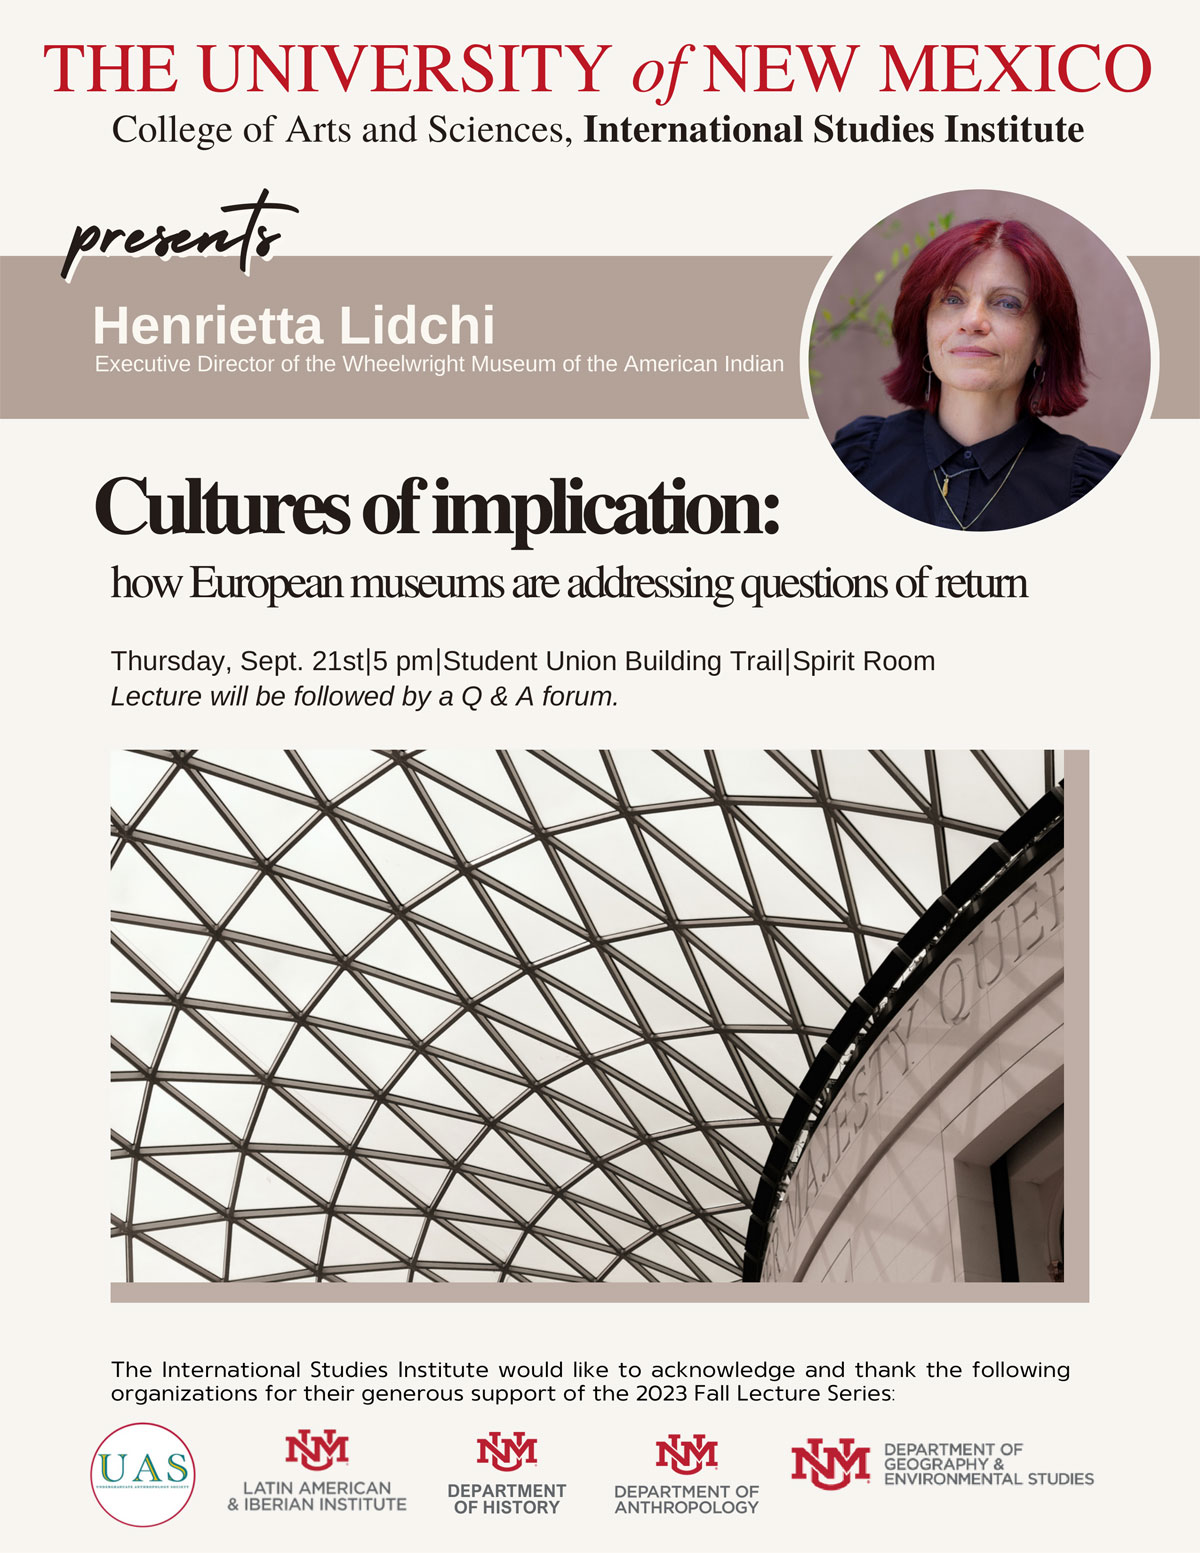 Cultures of Implication: how European museums are addressing the implications of return